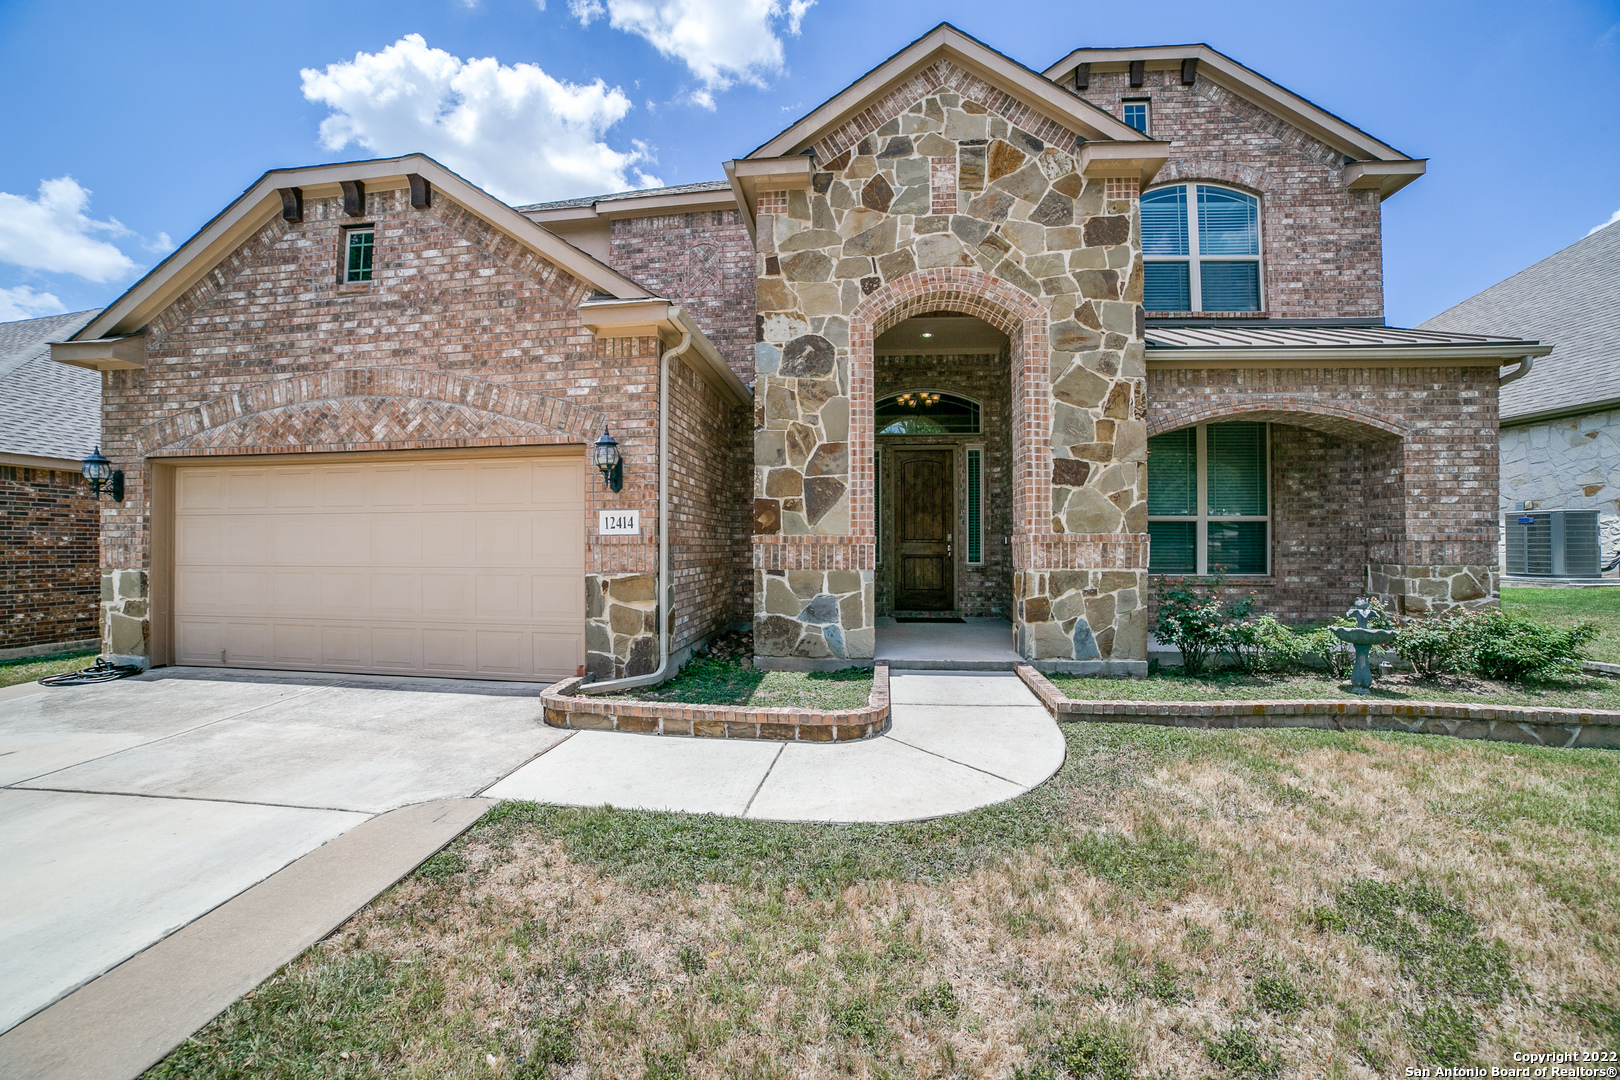 Beautiful family home built by Gehan in a gated community in Alamo Ranch. As you enter you will notice an open floor plan with around 20ft high ceilings in the living area. The Master bedroom, utility room and the separate office is located on the first floor. In the kitchen there are stainless steel appliances, granite counters, an island, gas cooktop and 42 inch cabinets. Lots of natural light, gas fireplace, an oversized covered patio in the backyard for entertaining with a water way behind for extra privacy. Three secondary bedrooms upstairs with a media room, game room and two full bathrooms. Both HVAC units were recently replaced by the seller and the water softener is included. Highly rated schools, amenities include a pool, controlled access, park and jogging trails! Schedule your showing today! **OPEN HOUSE SATURDAY JUNE 25TH FROM 12-3 PM and SUNDAY JUNE 26TH FROM 1-4 PM**